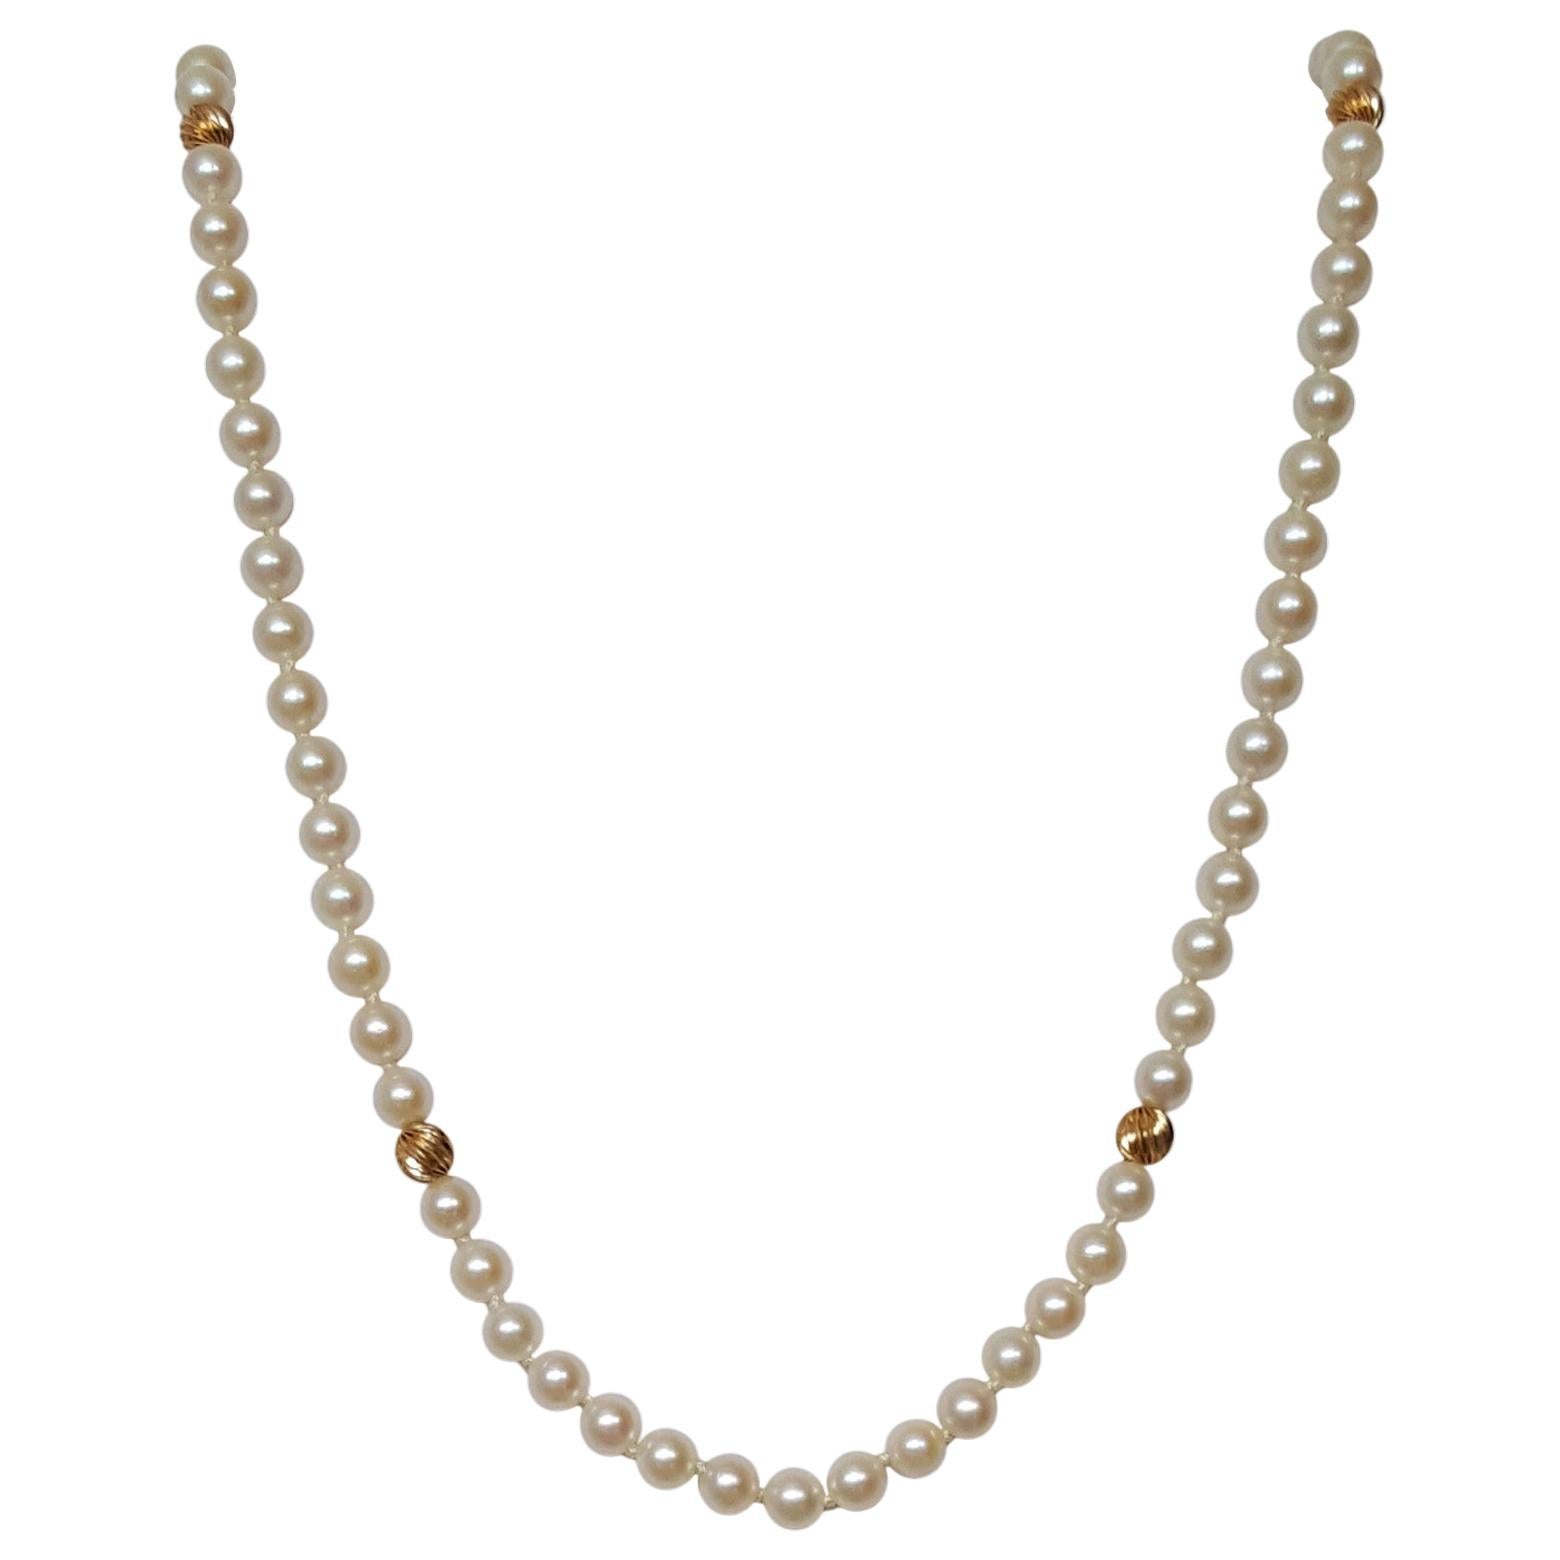 Cultured Pearl Strand Grade A White Cream Pearls 14kt Yellow Gold Beads, 31 Inch For Sale